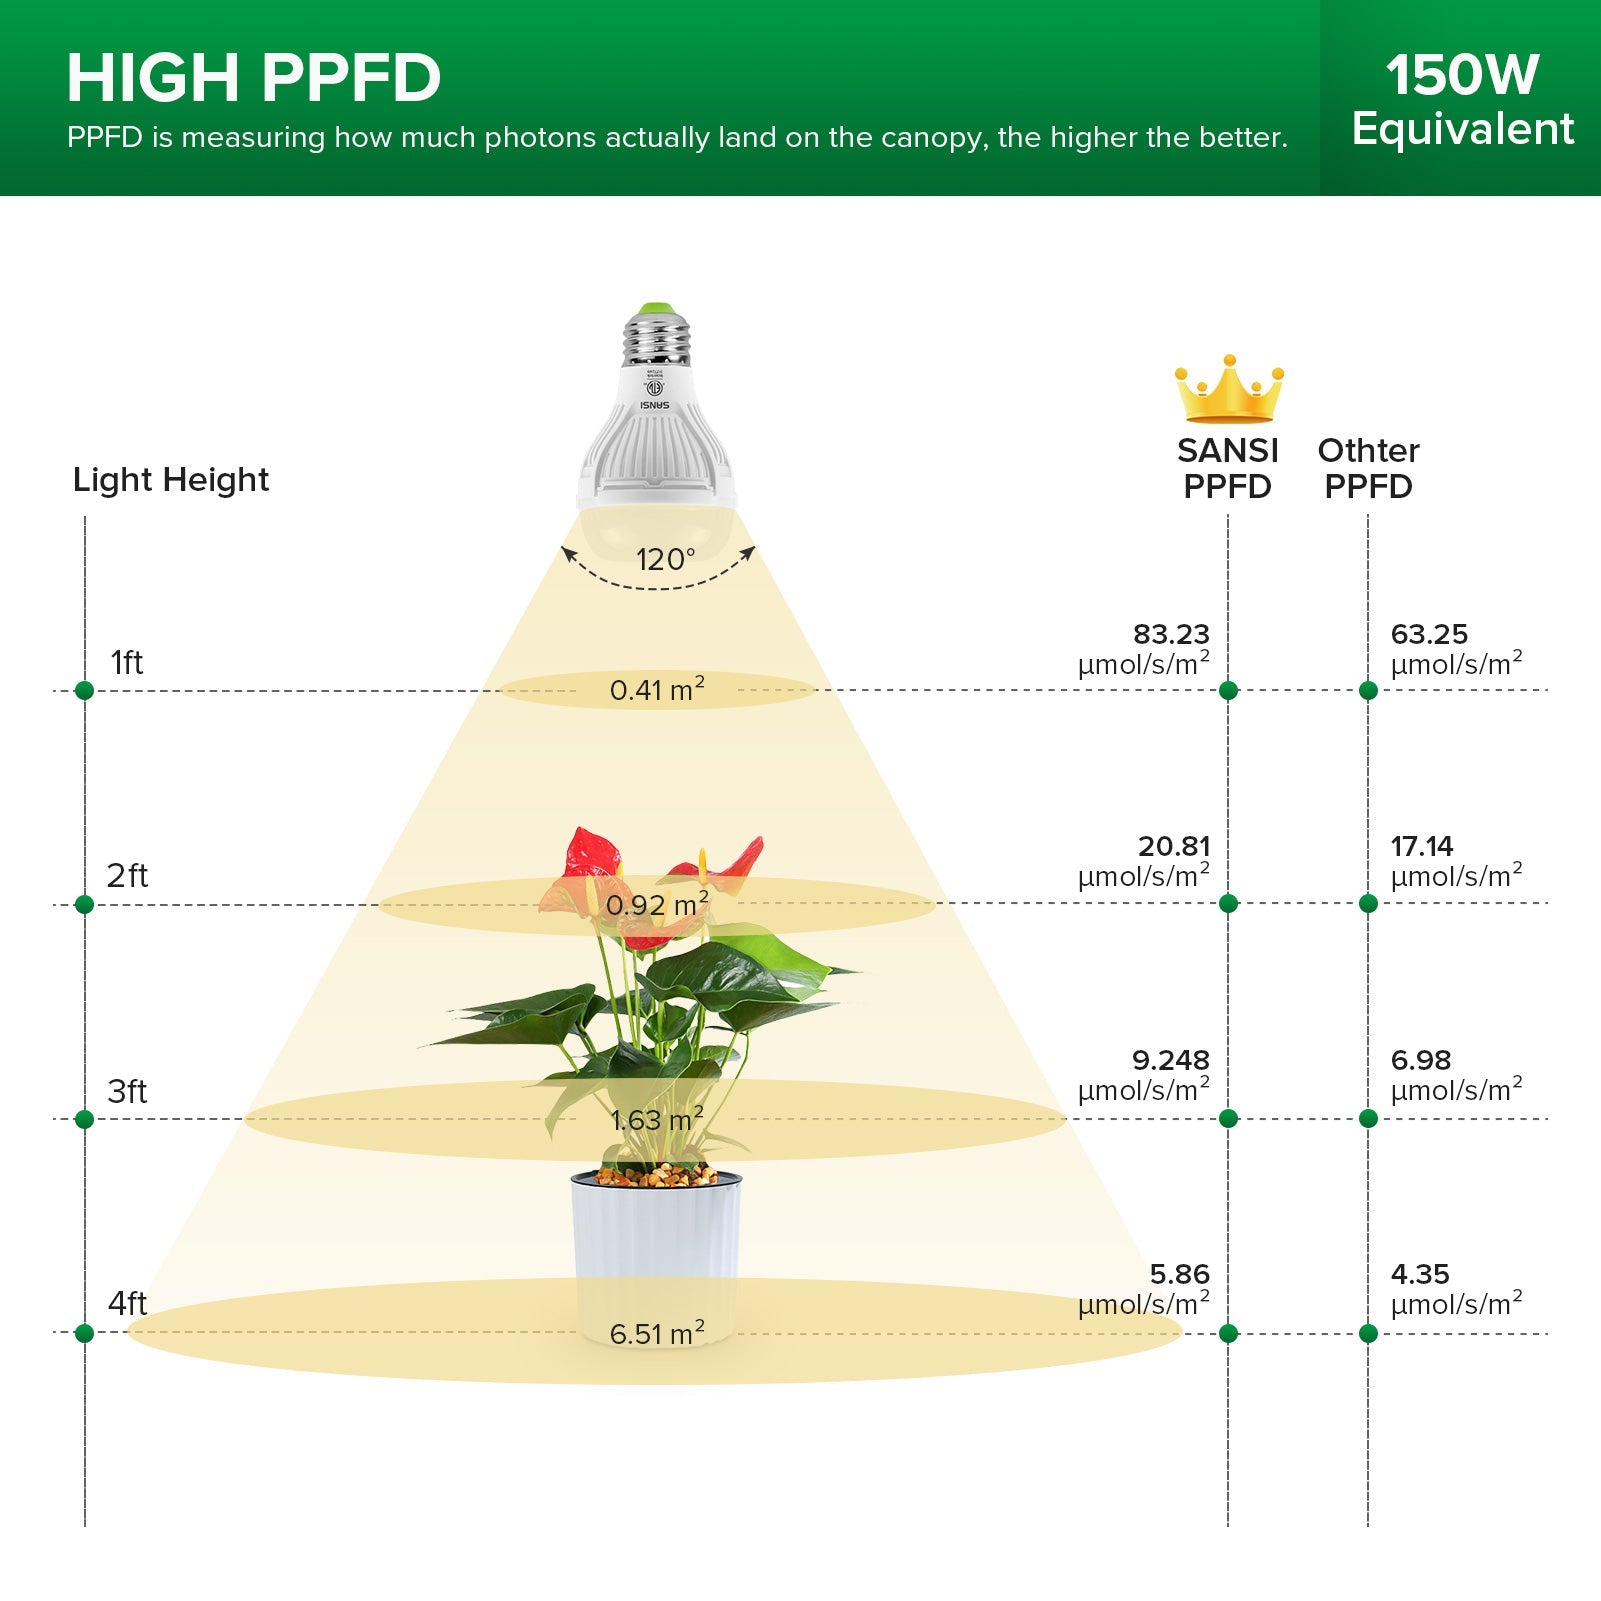 A19 10W LED Grow Light Bulbs have high PPFD,PPFD is measuring how much photons actually land on the canopy, the higher the better.